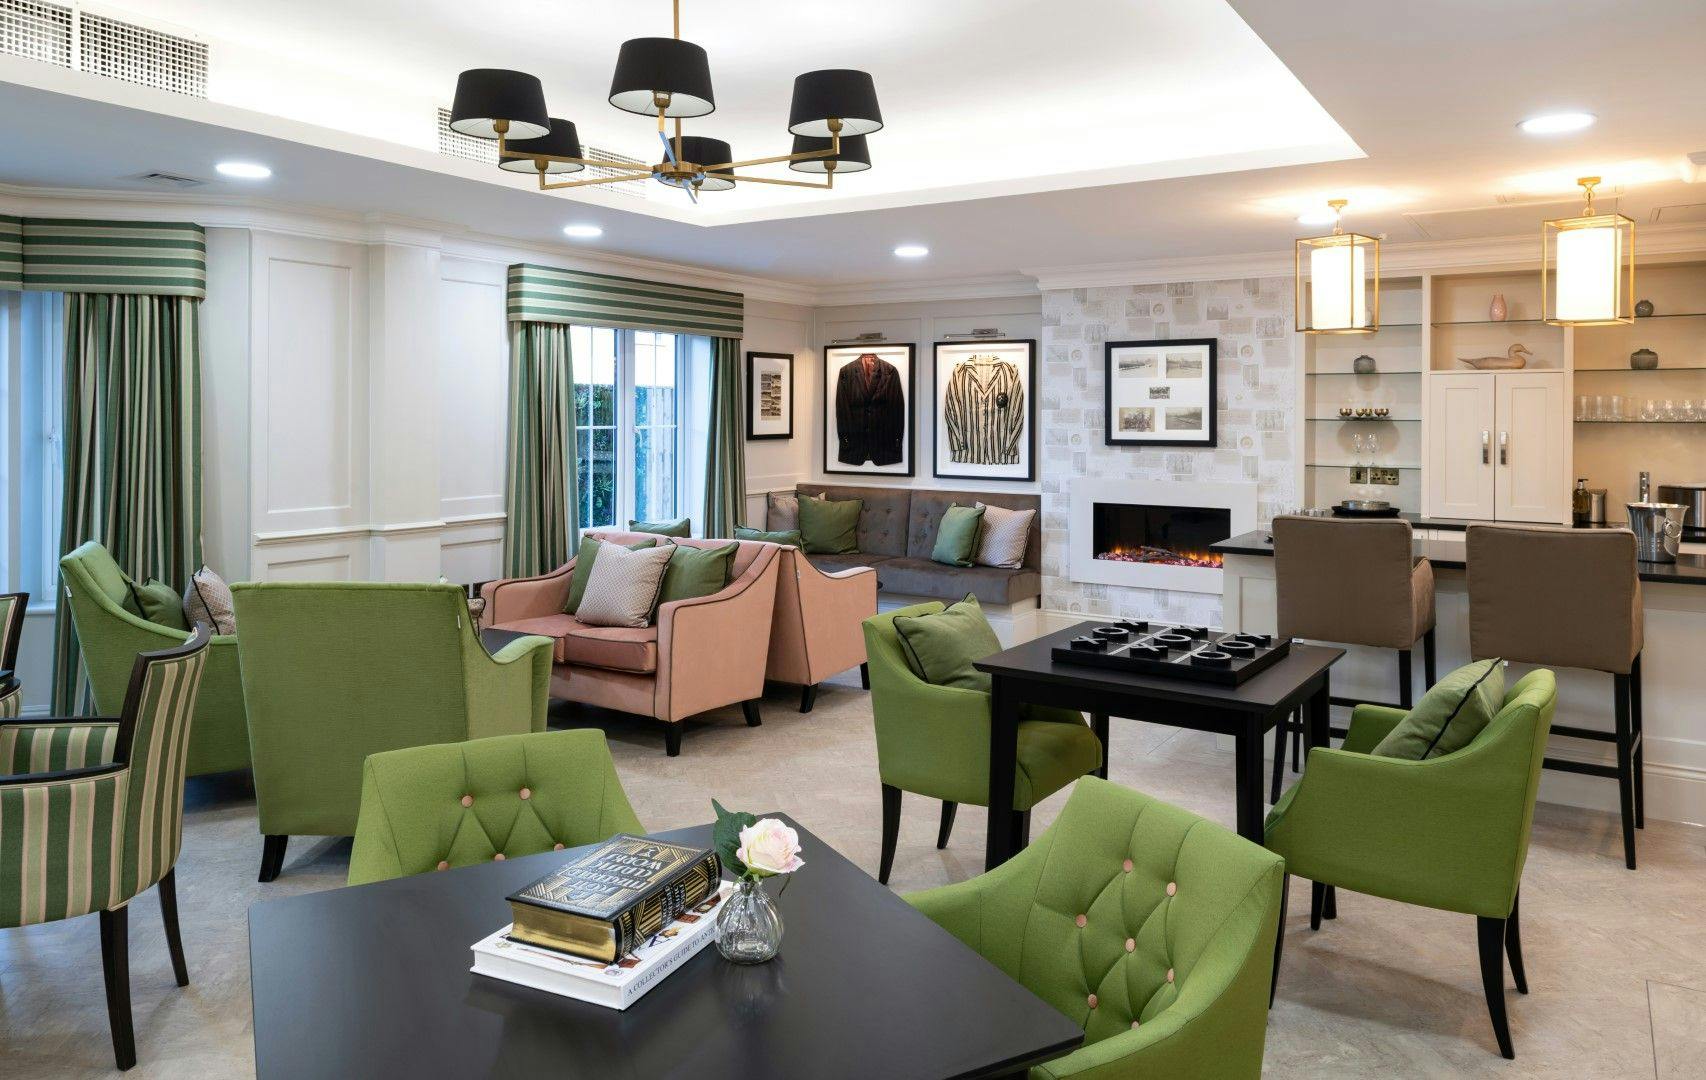 Communal Area at Henley Manor Care Home in Henley-on-Thames, South Oxfordshire